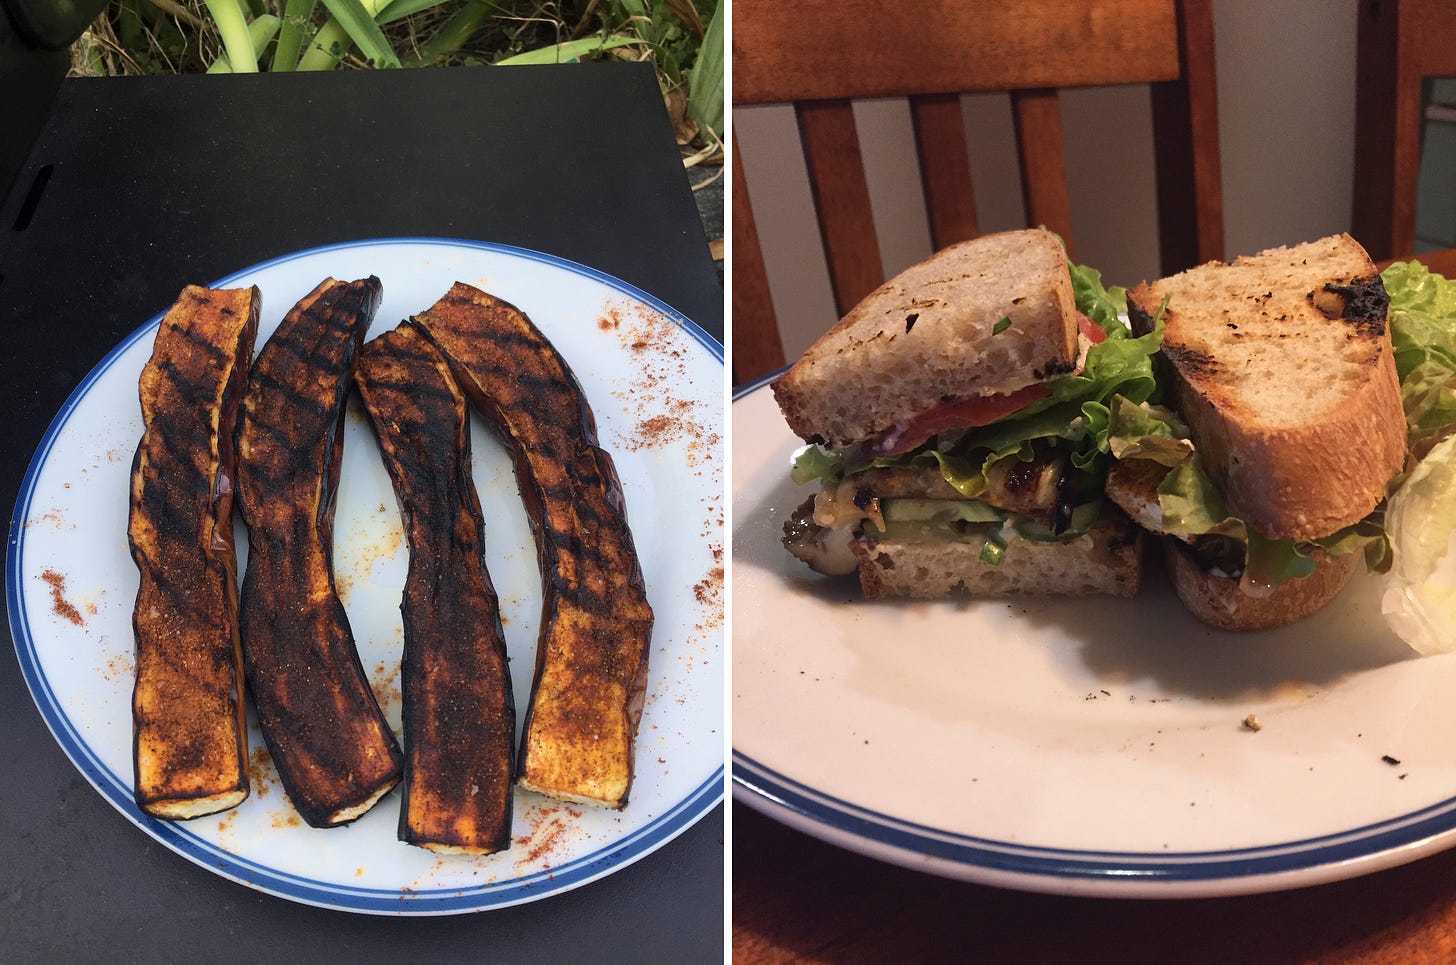 Left image: a plate with four skinny grilled eggplant halves, heavily seasoned with smoked paprika and chili powder. Right image: A sandwich with the eggplant, pickles, and vegetables on pieces of grilled sourdough.